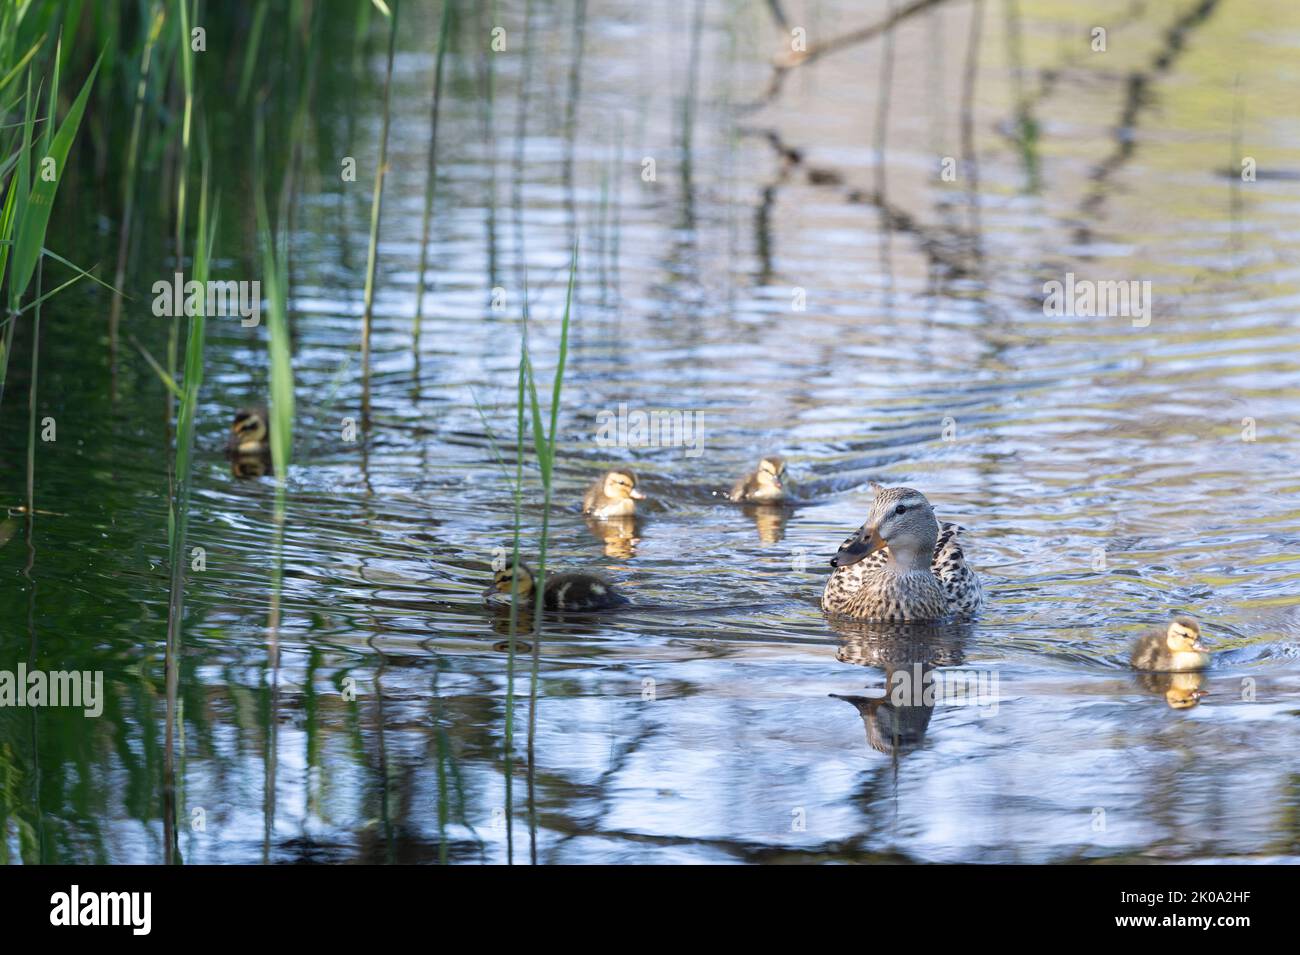 Mother duck with ducklings swimming in the water Stock Photo